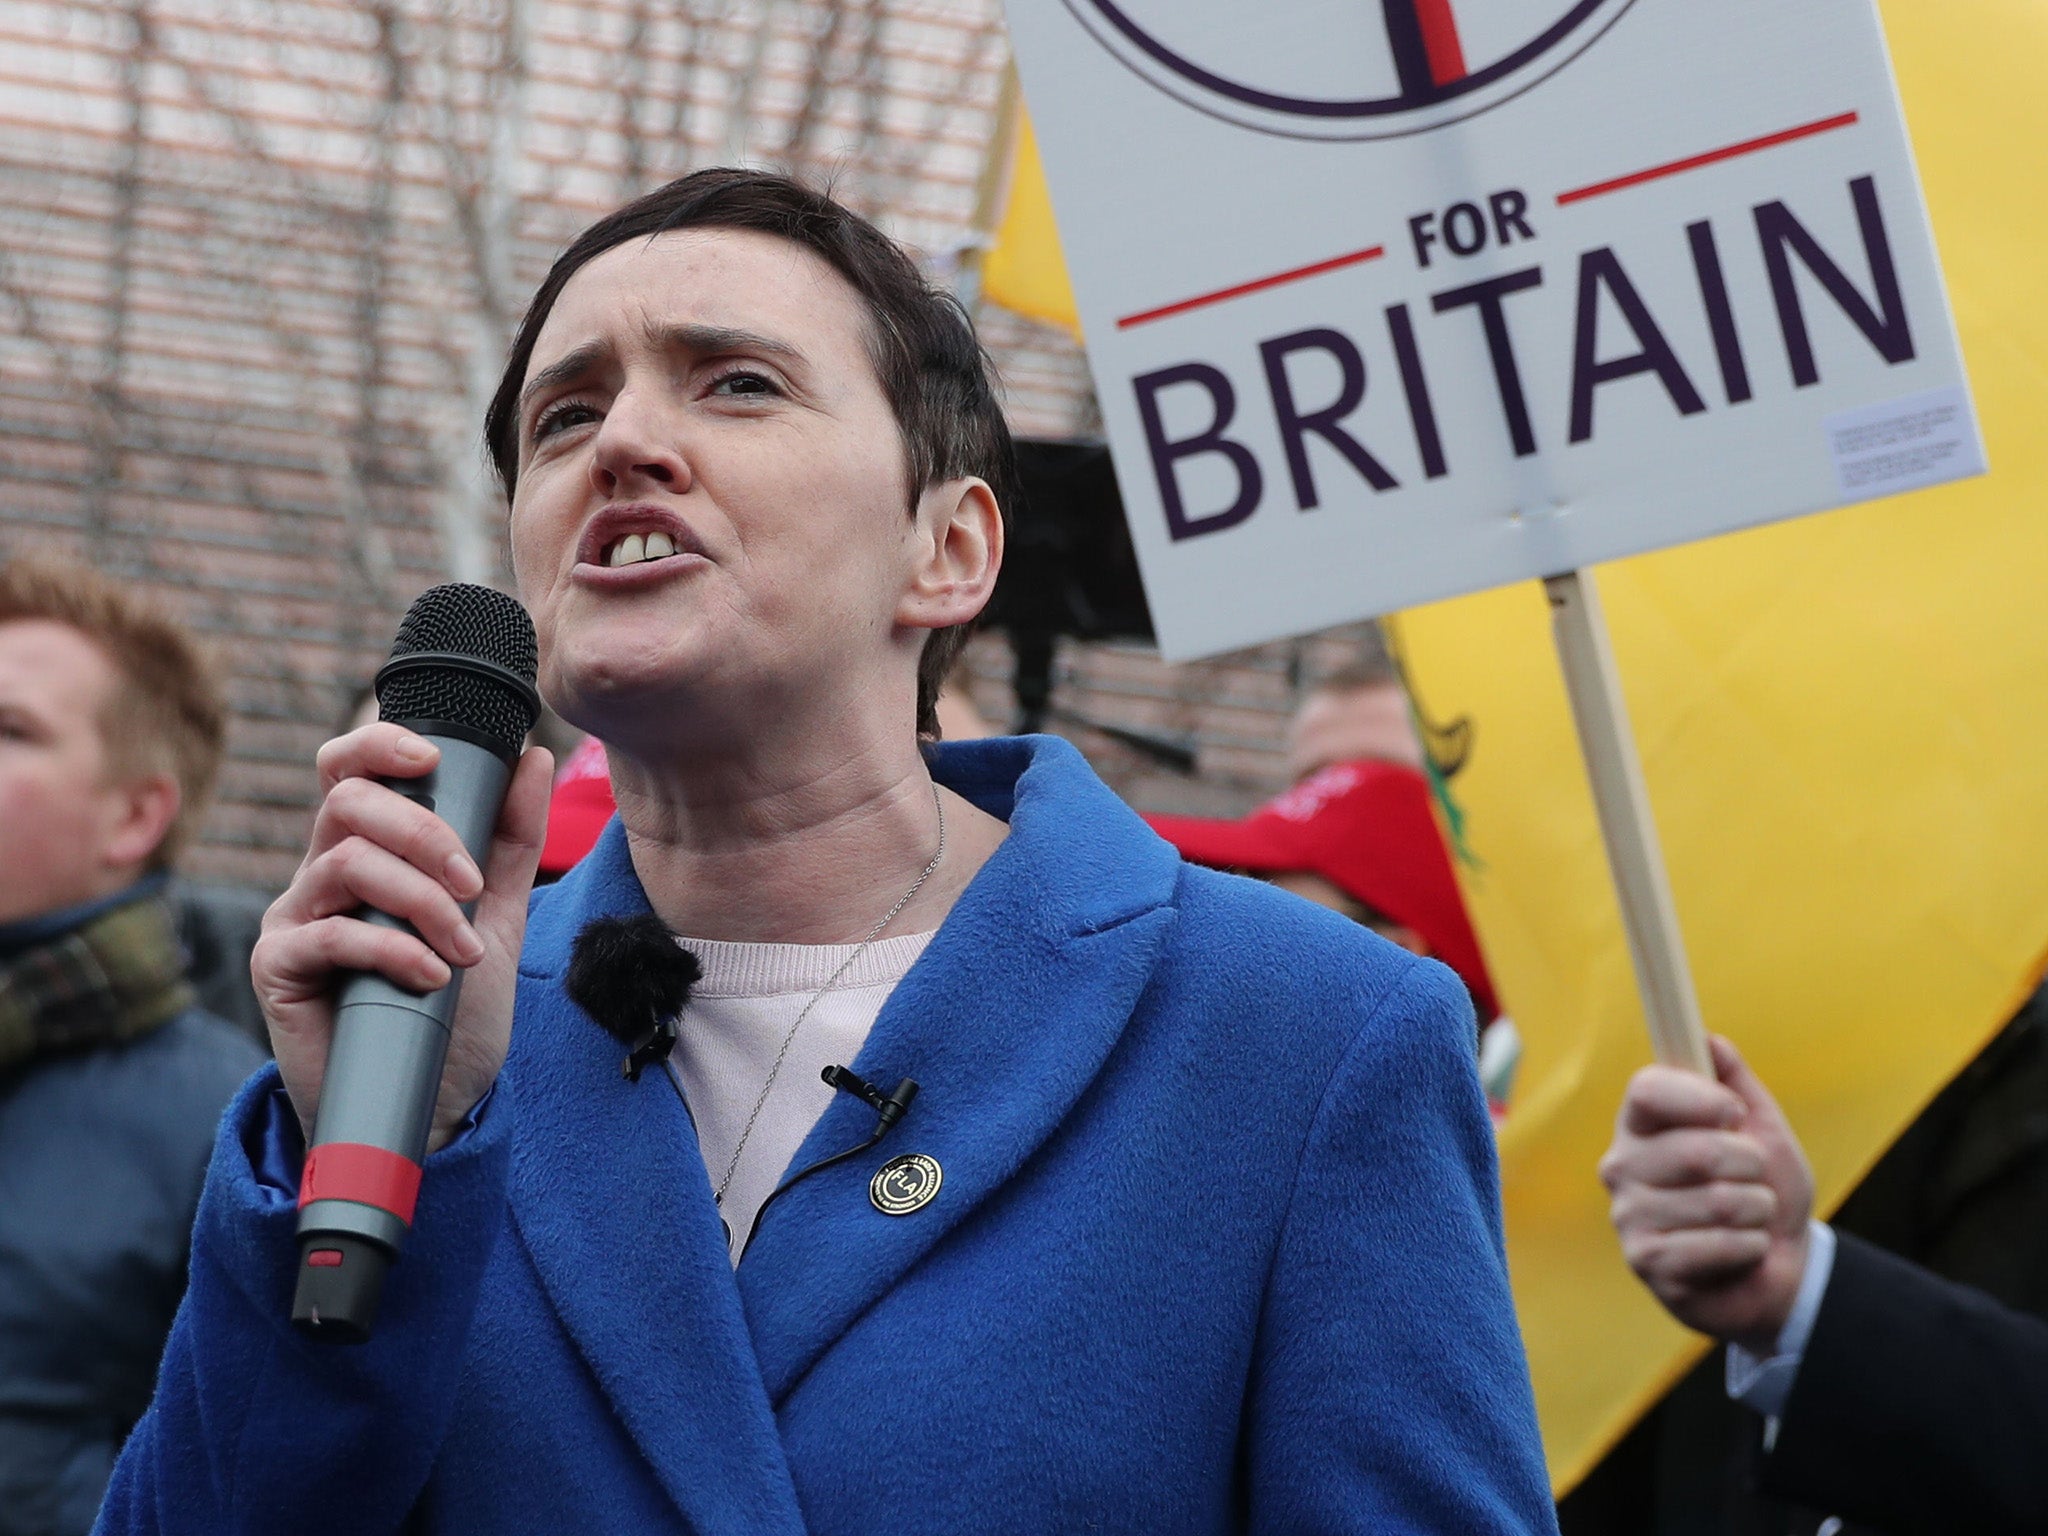 For Britain leader Anne Marie Waters was among the prominent figures standing for election (PA)